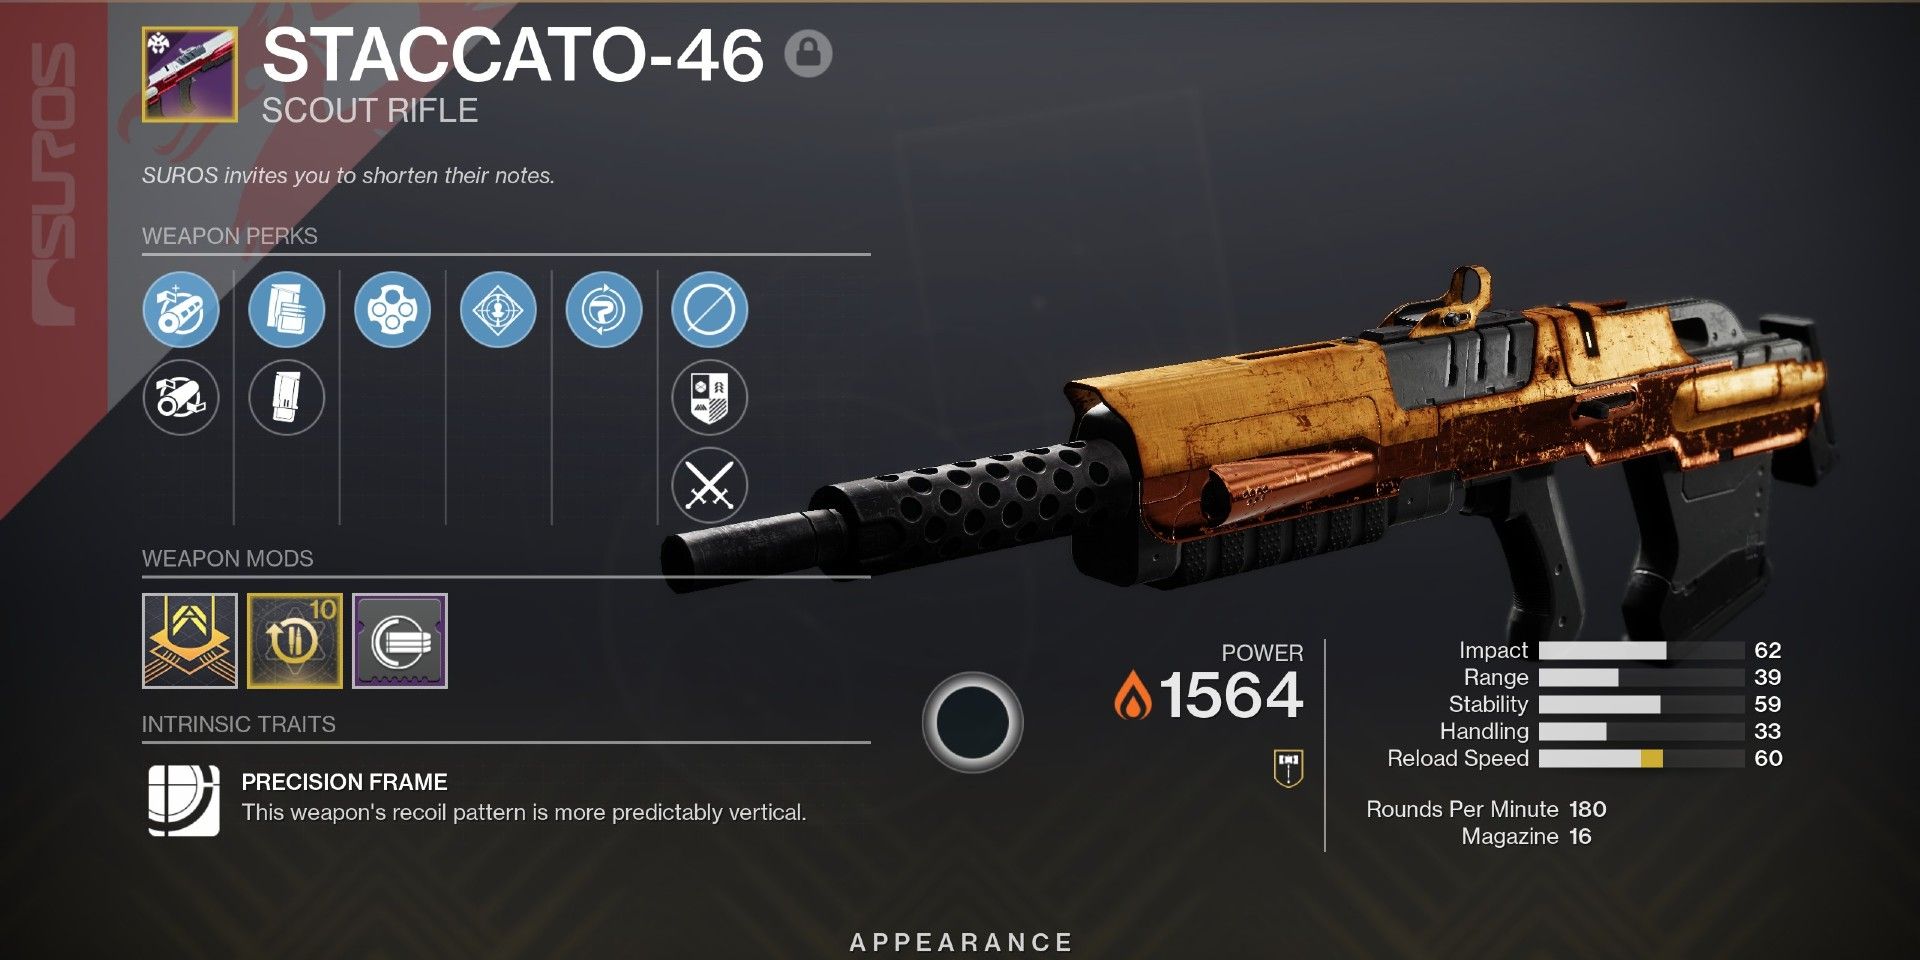 Destiny 2: How To Get The Staccato-46 (& God Roll)